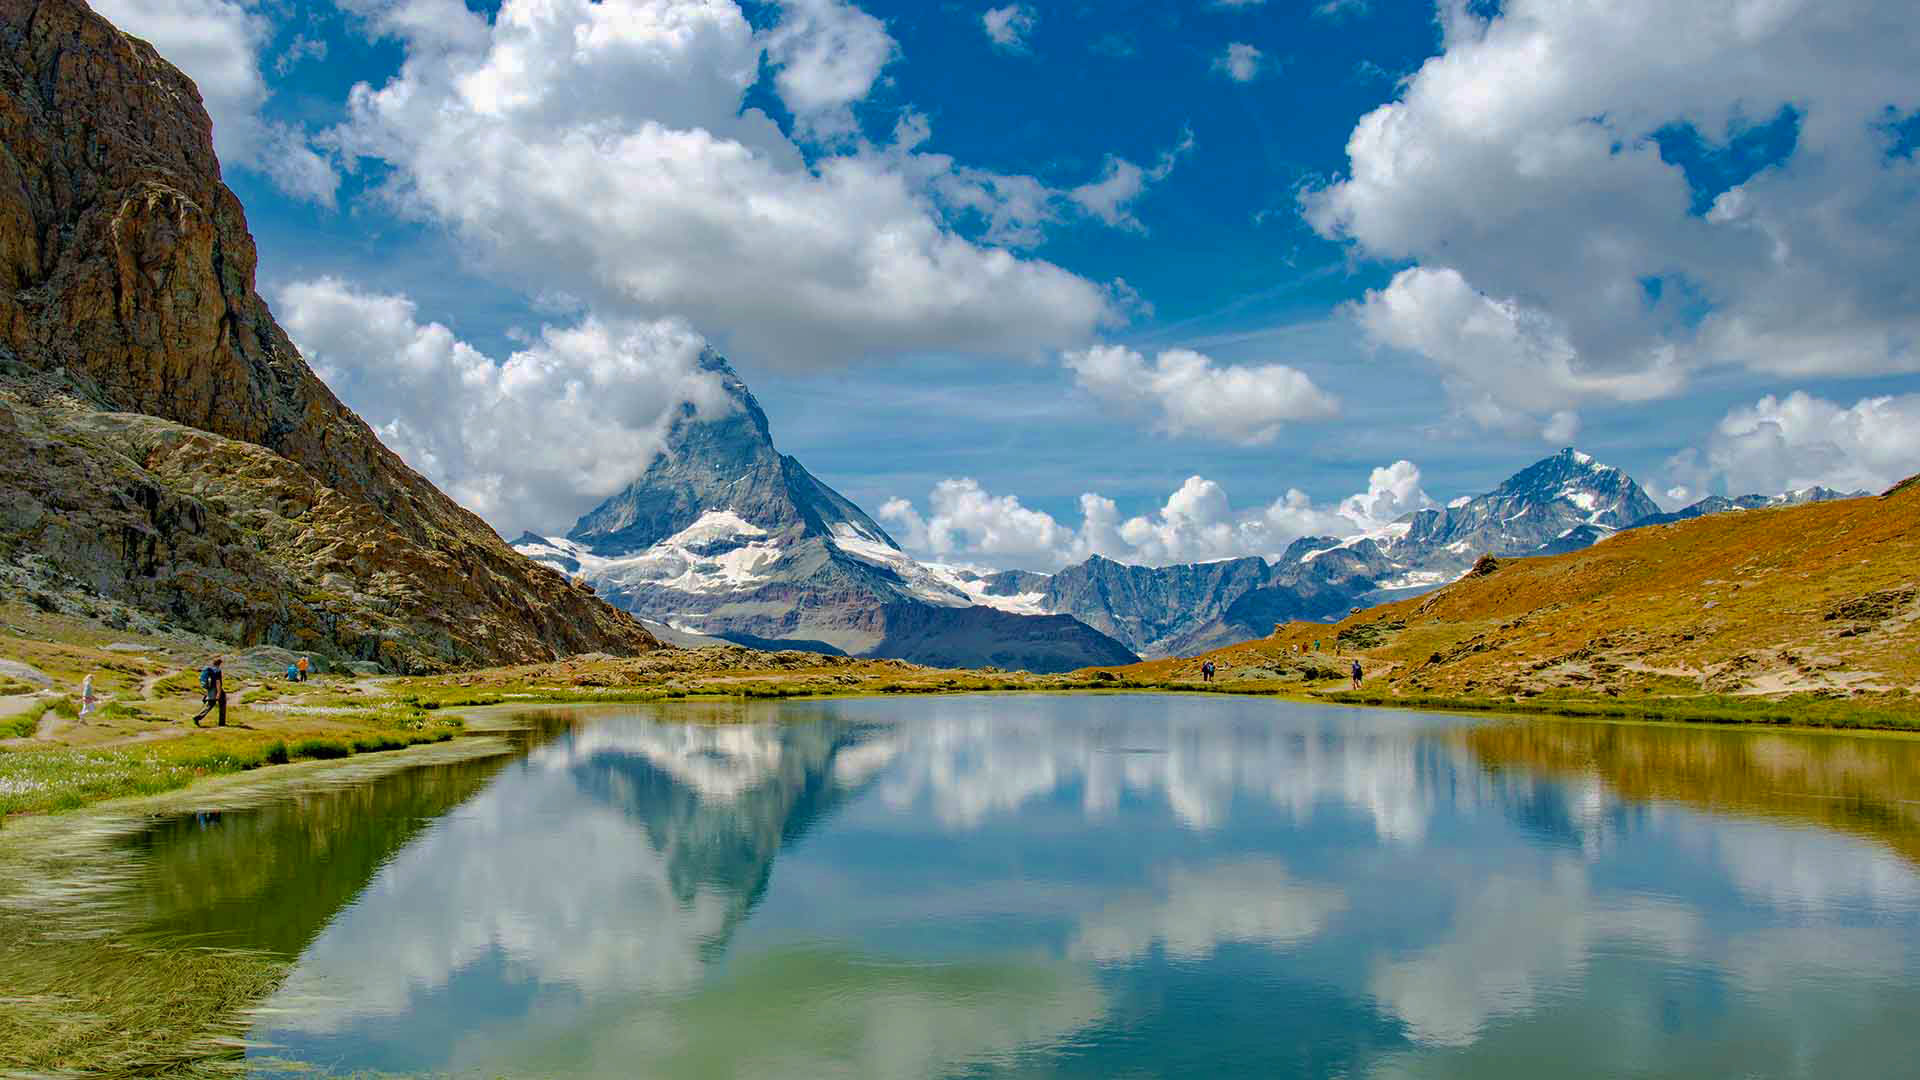 Matterhorn mountain with a lake and hikers in the foreground, Switzerland